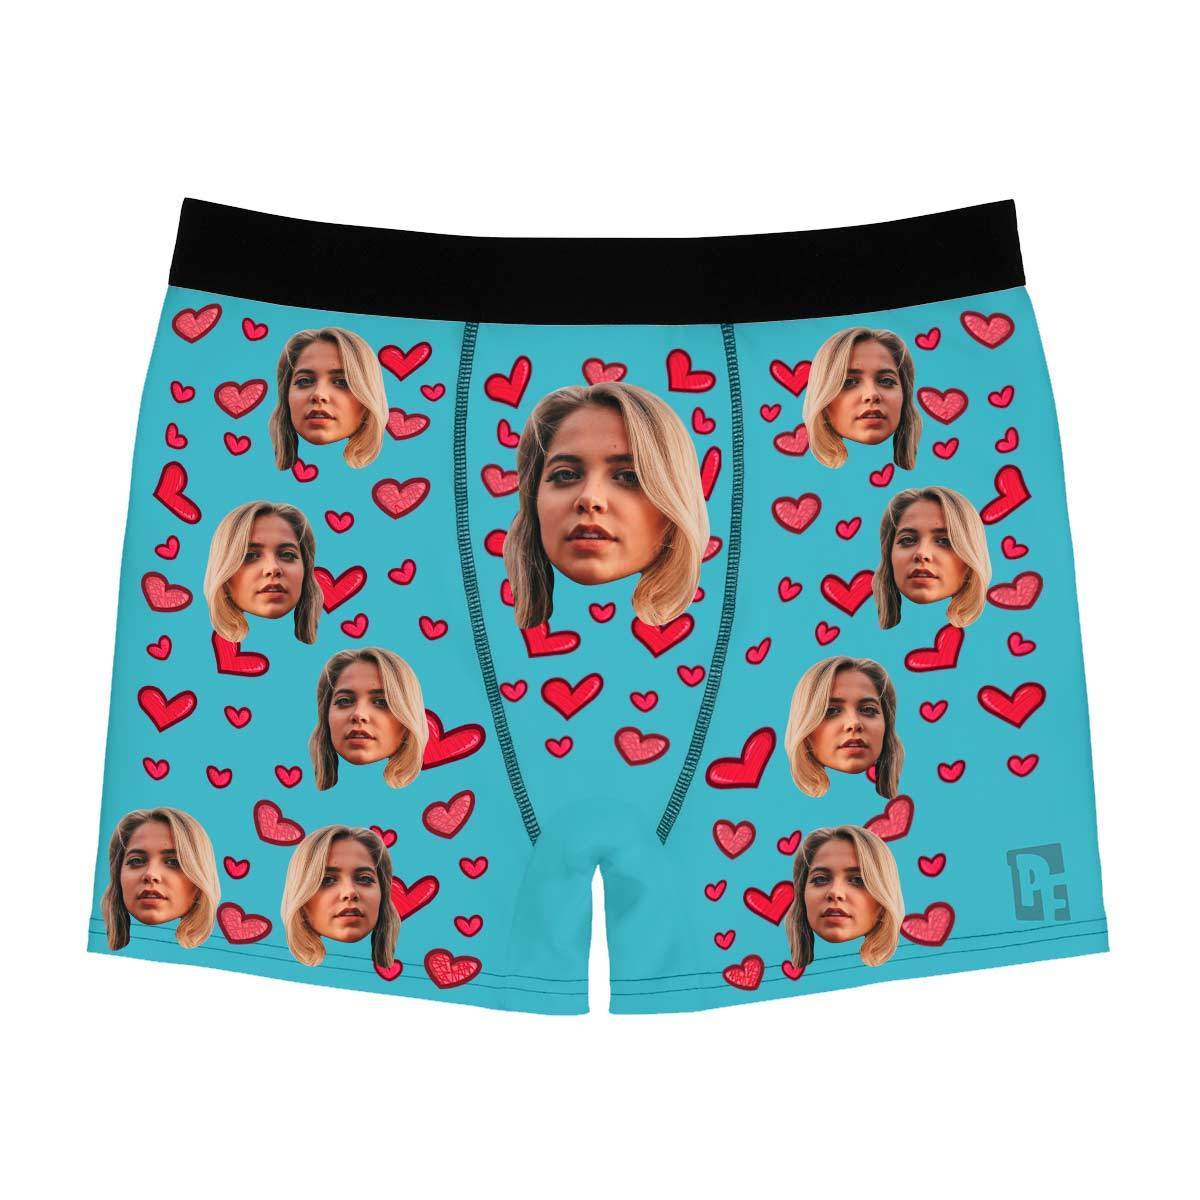 Mint Heart men's boxer briefs personalized with photo printed on them